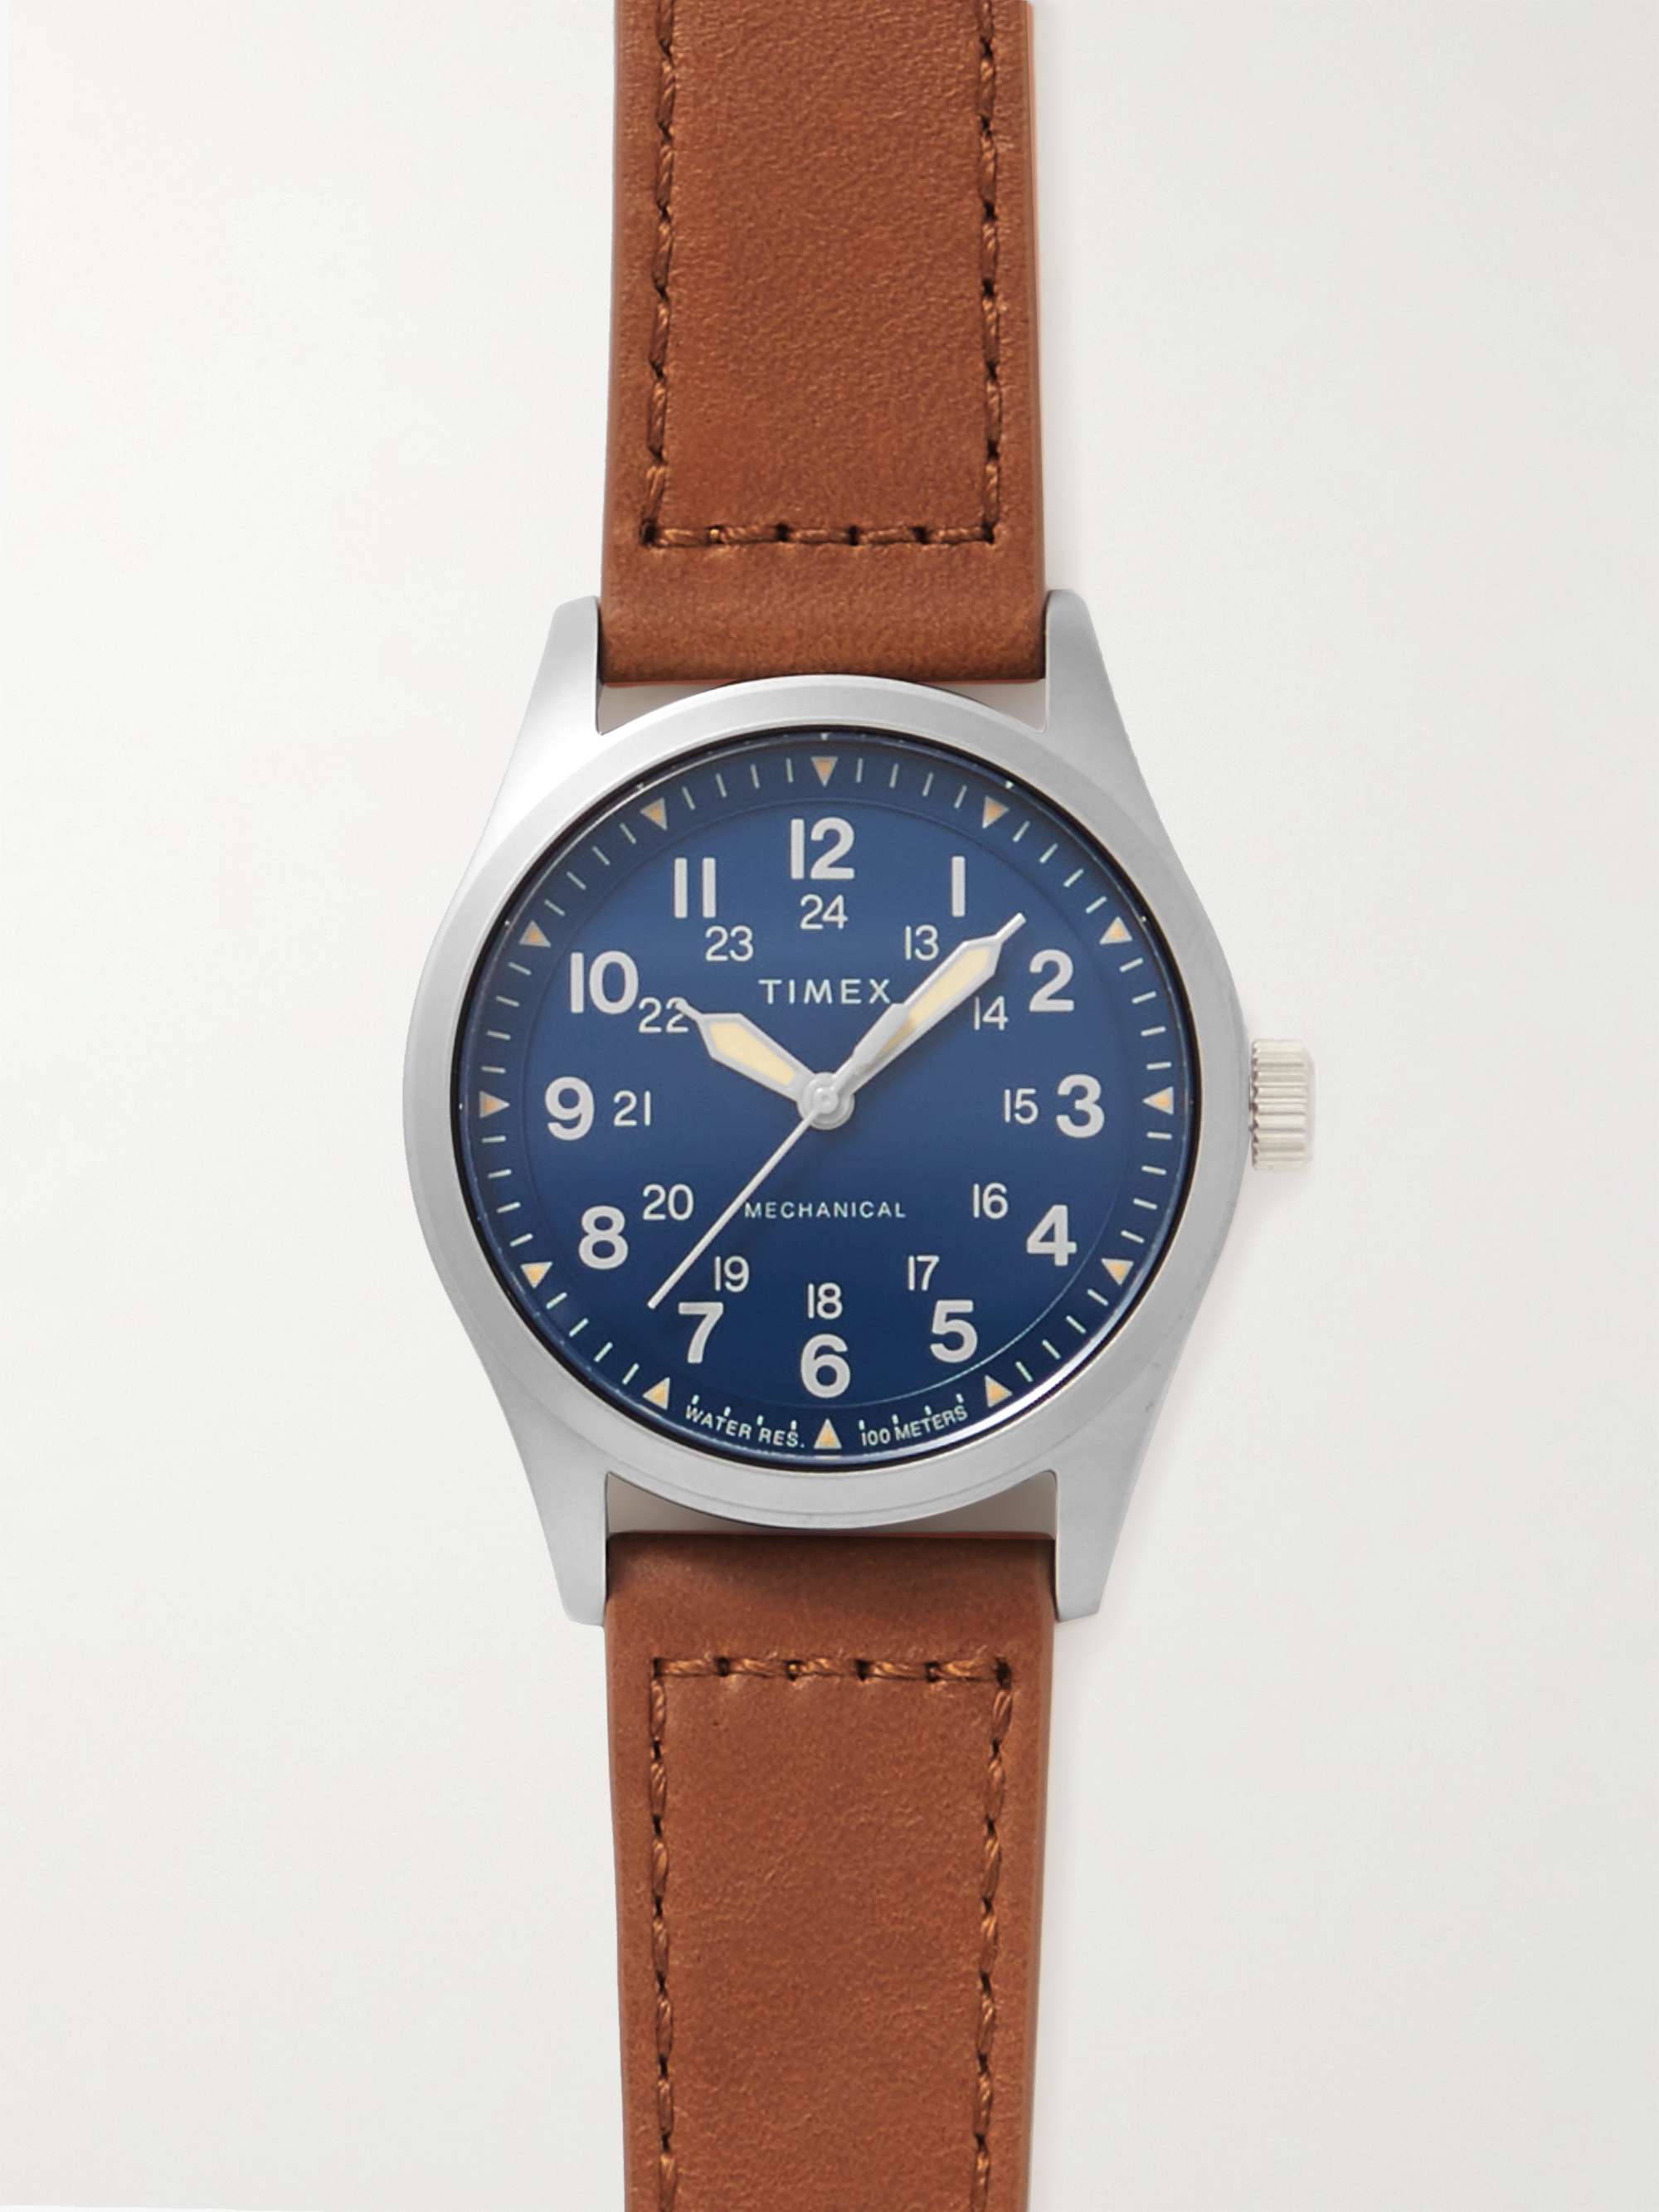 TIMEX Expedition North Field Post 38mm Hand-Wound Stainless Steel and Leather Watch